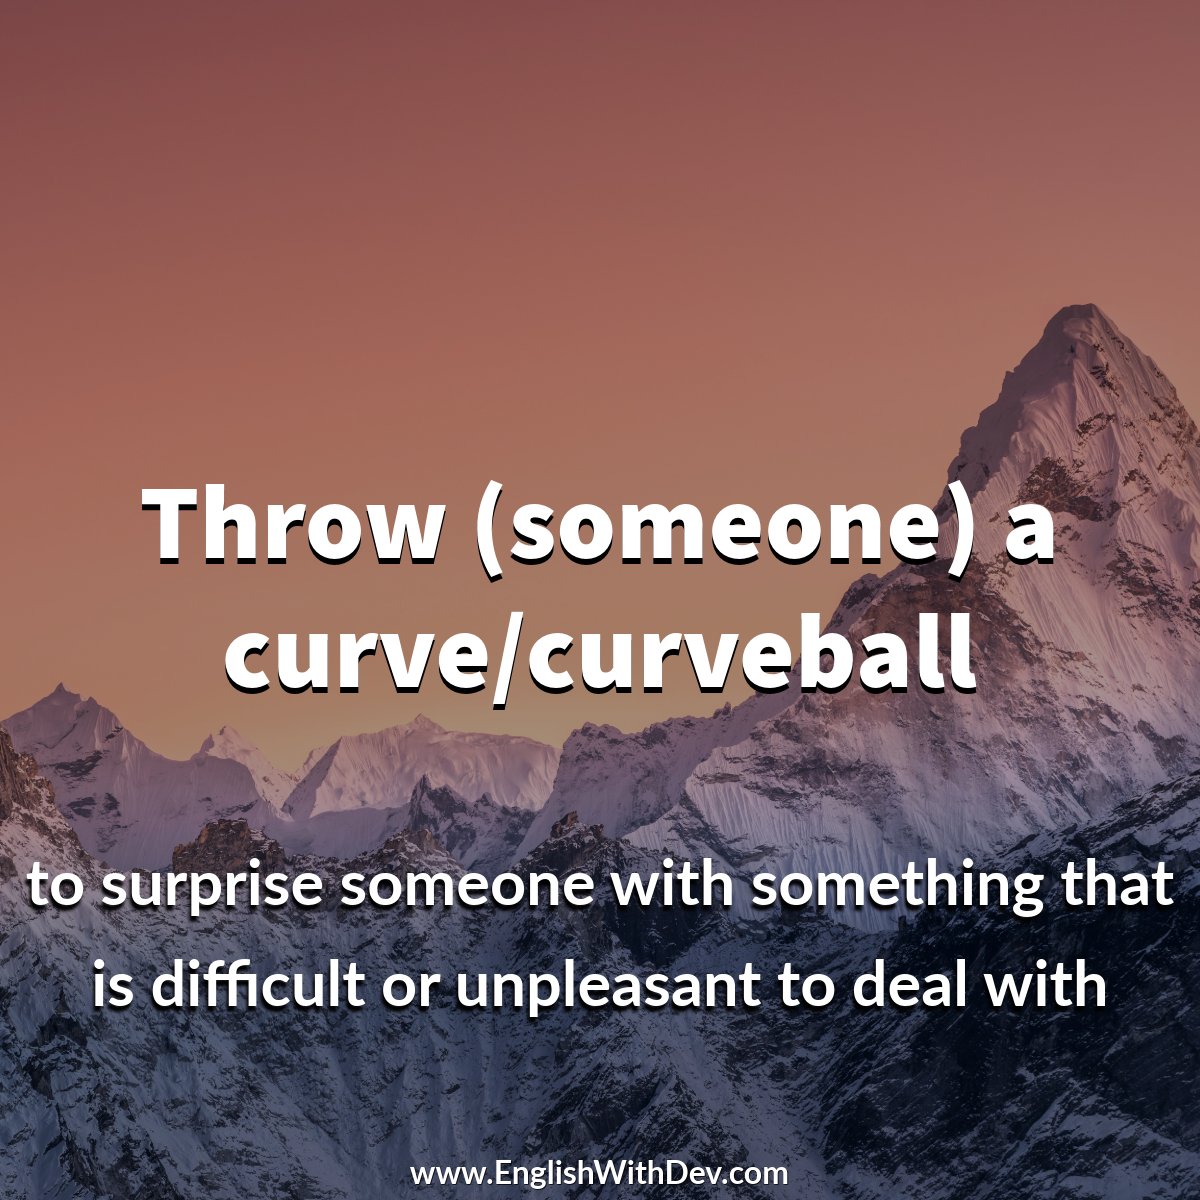 Throw (someone) a curve/curveball - to surprise someone with something that is difficult or unpleasant to deal with

Example - Mother Nature threw us a curve ball last winter with record-breaking amounts of snow.

#idioms #idiom #englishidioms #throwacurveball #englishteacher